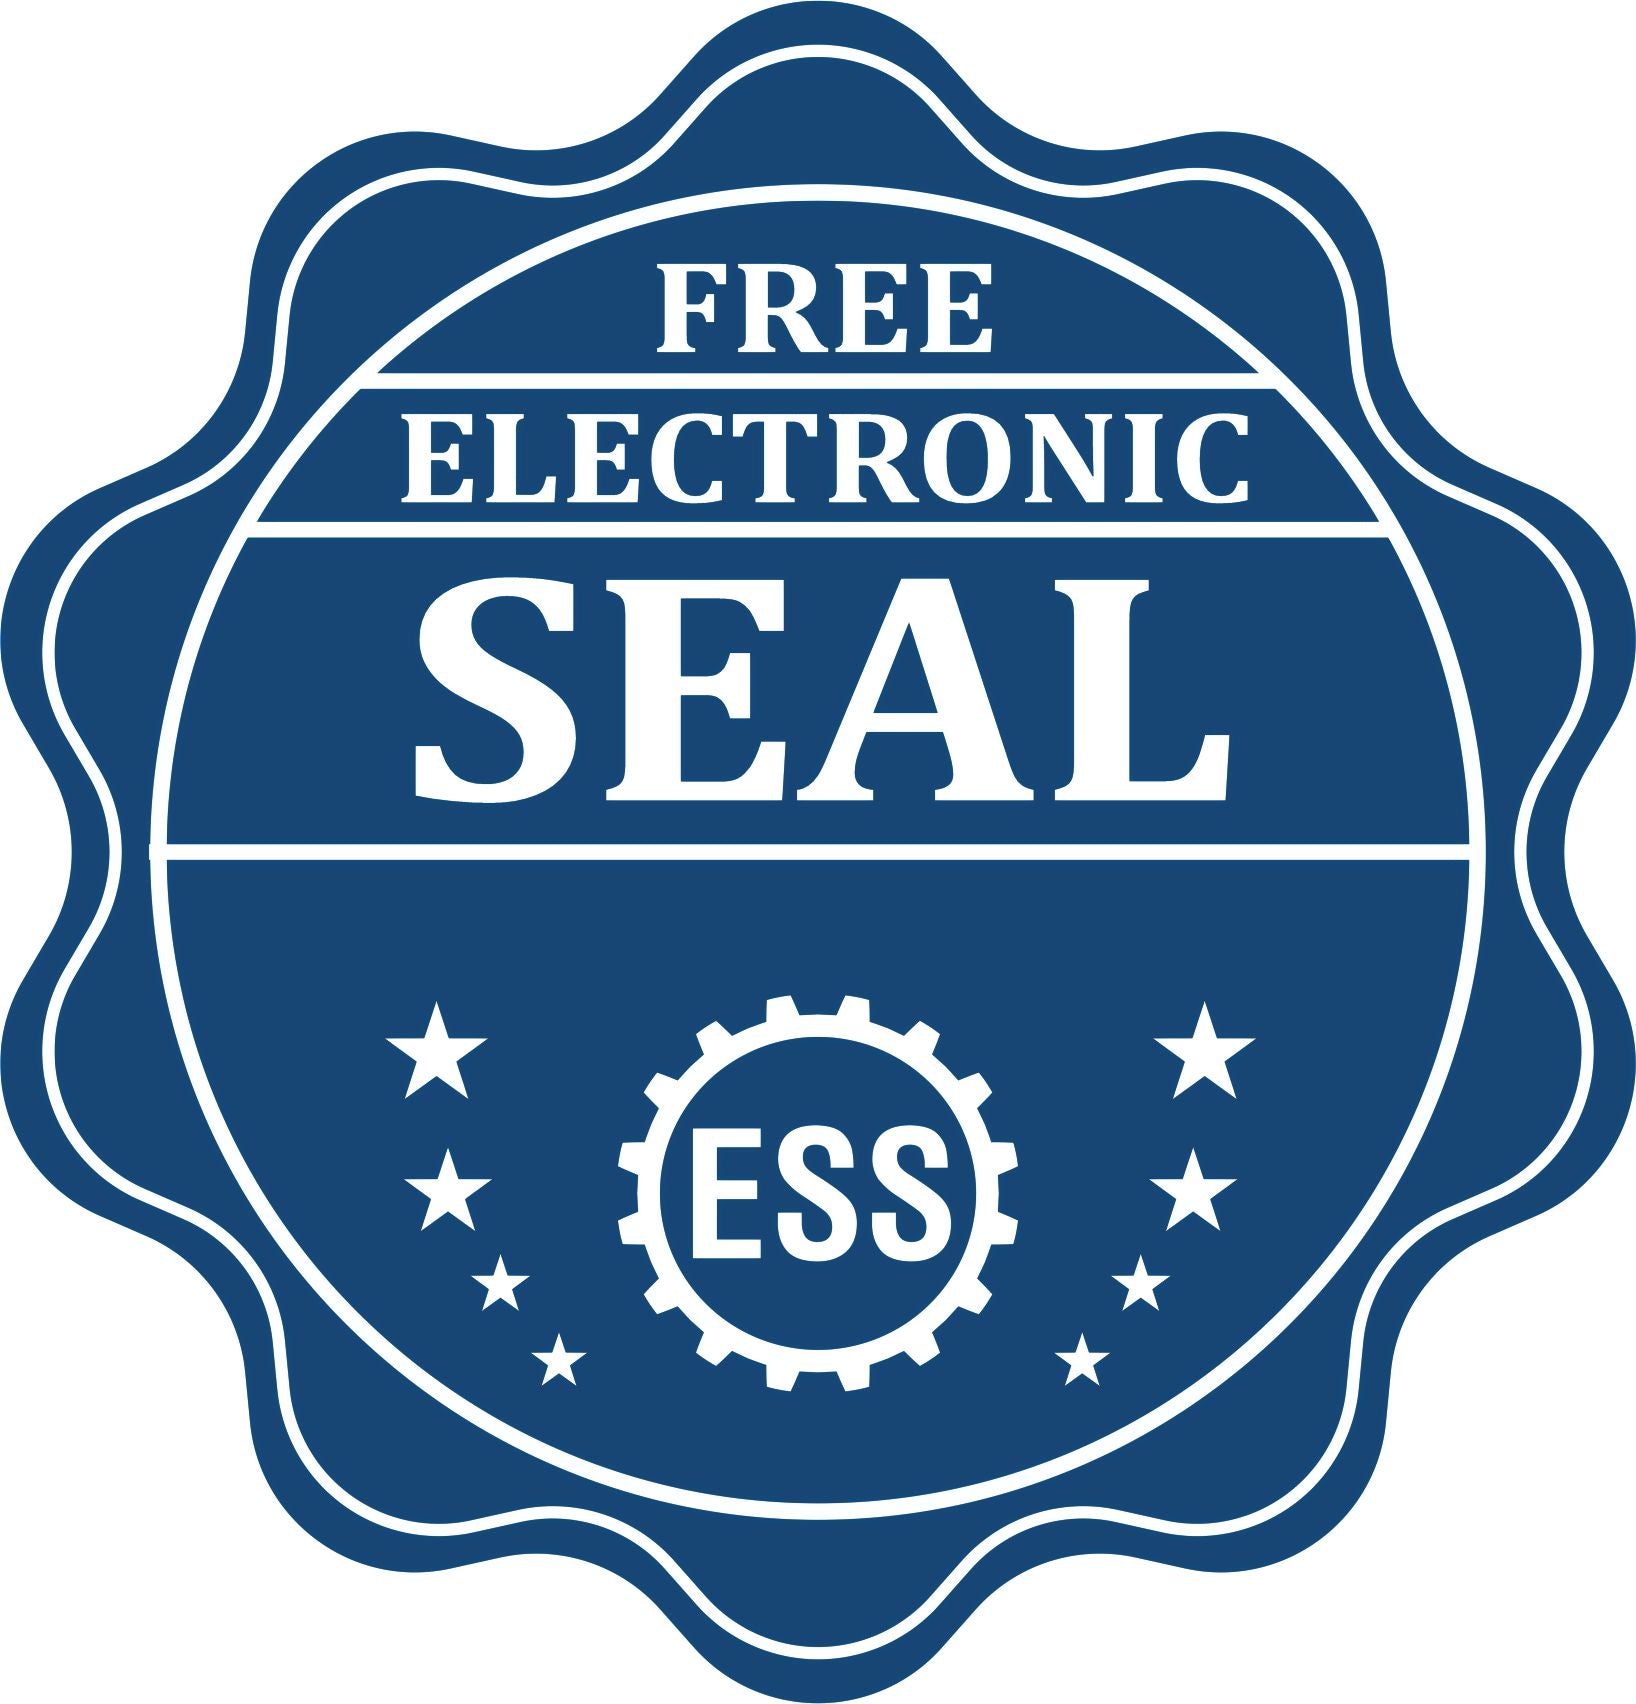 A badge showing a free electronic seal for the Gift Georgia Geologist Seal with stars and the ESS gear on the emblem.